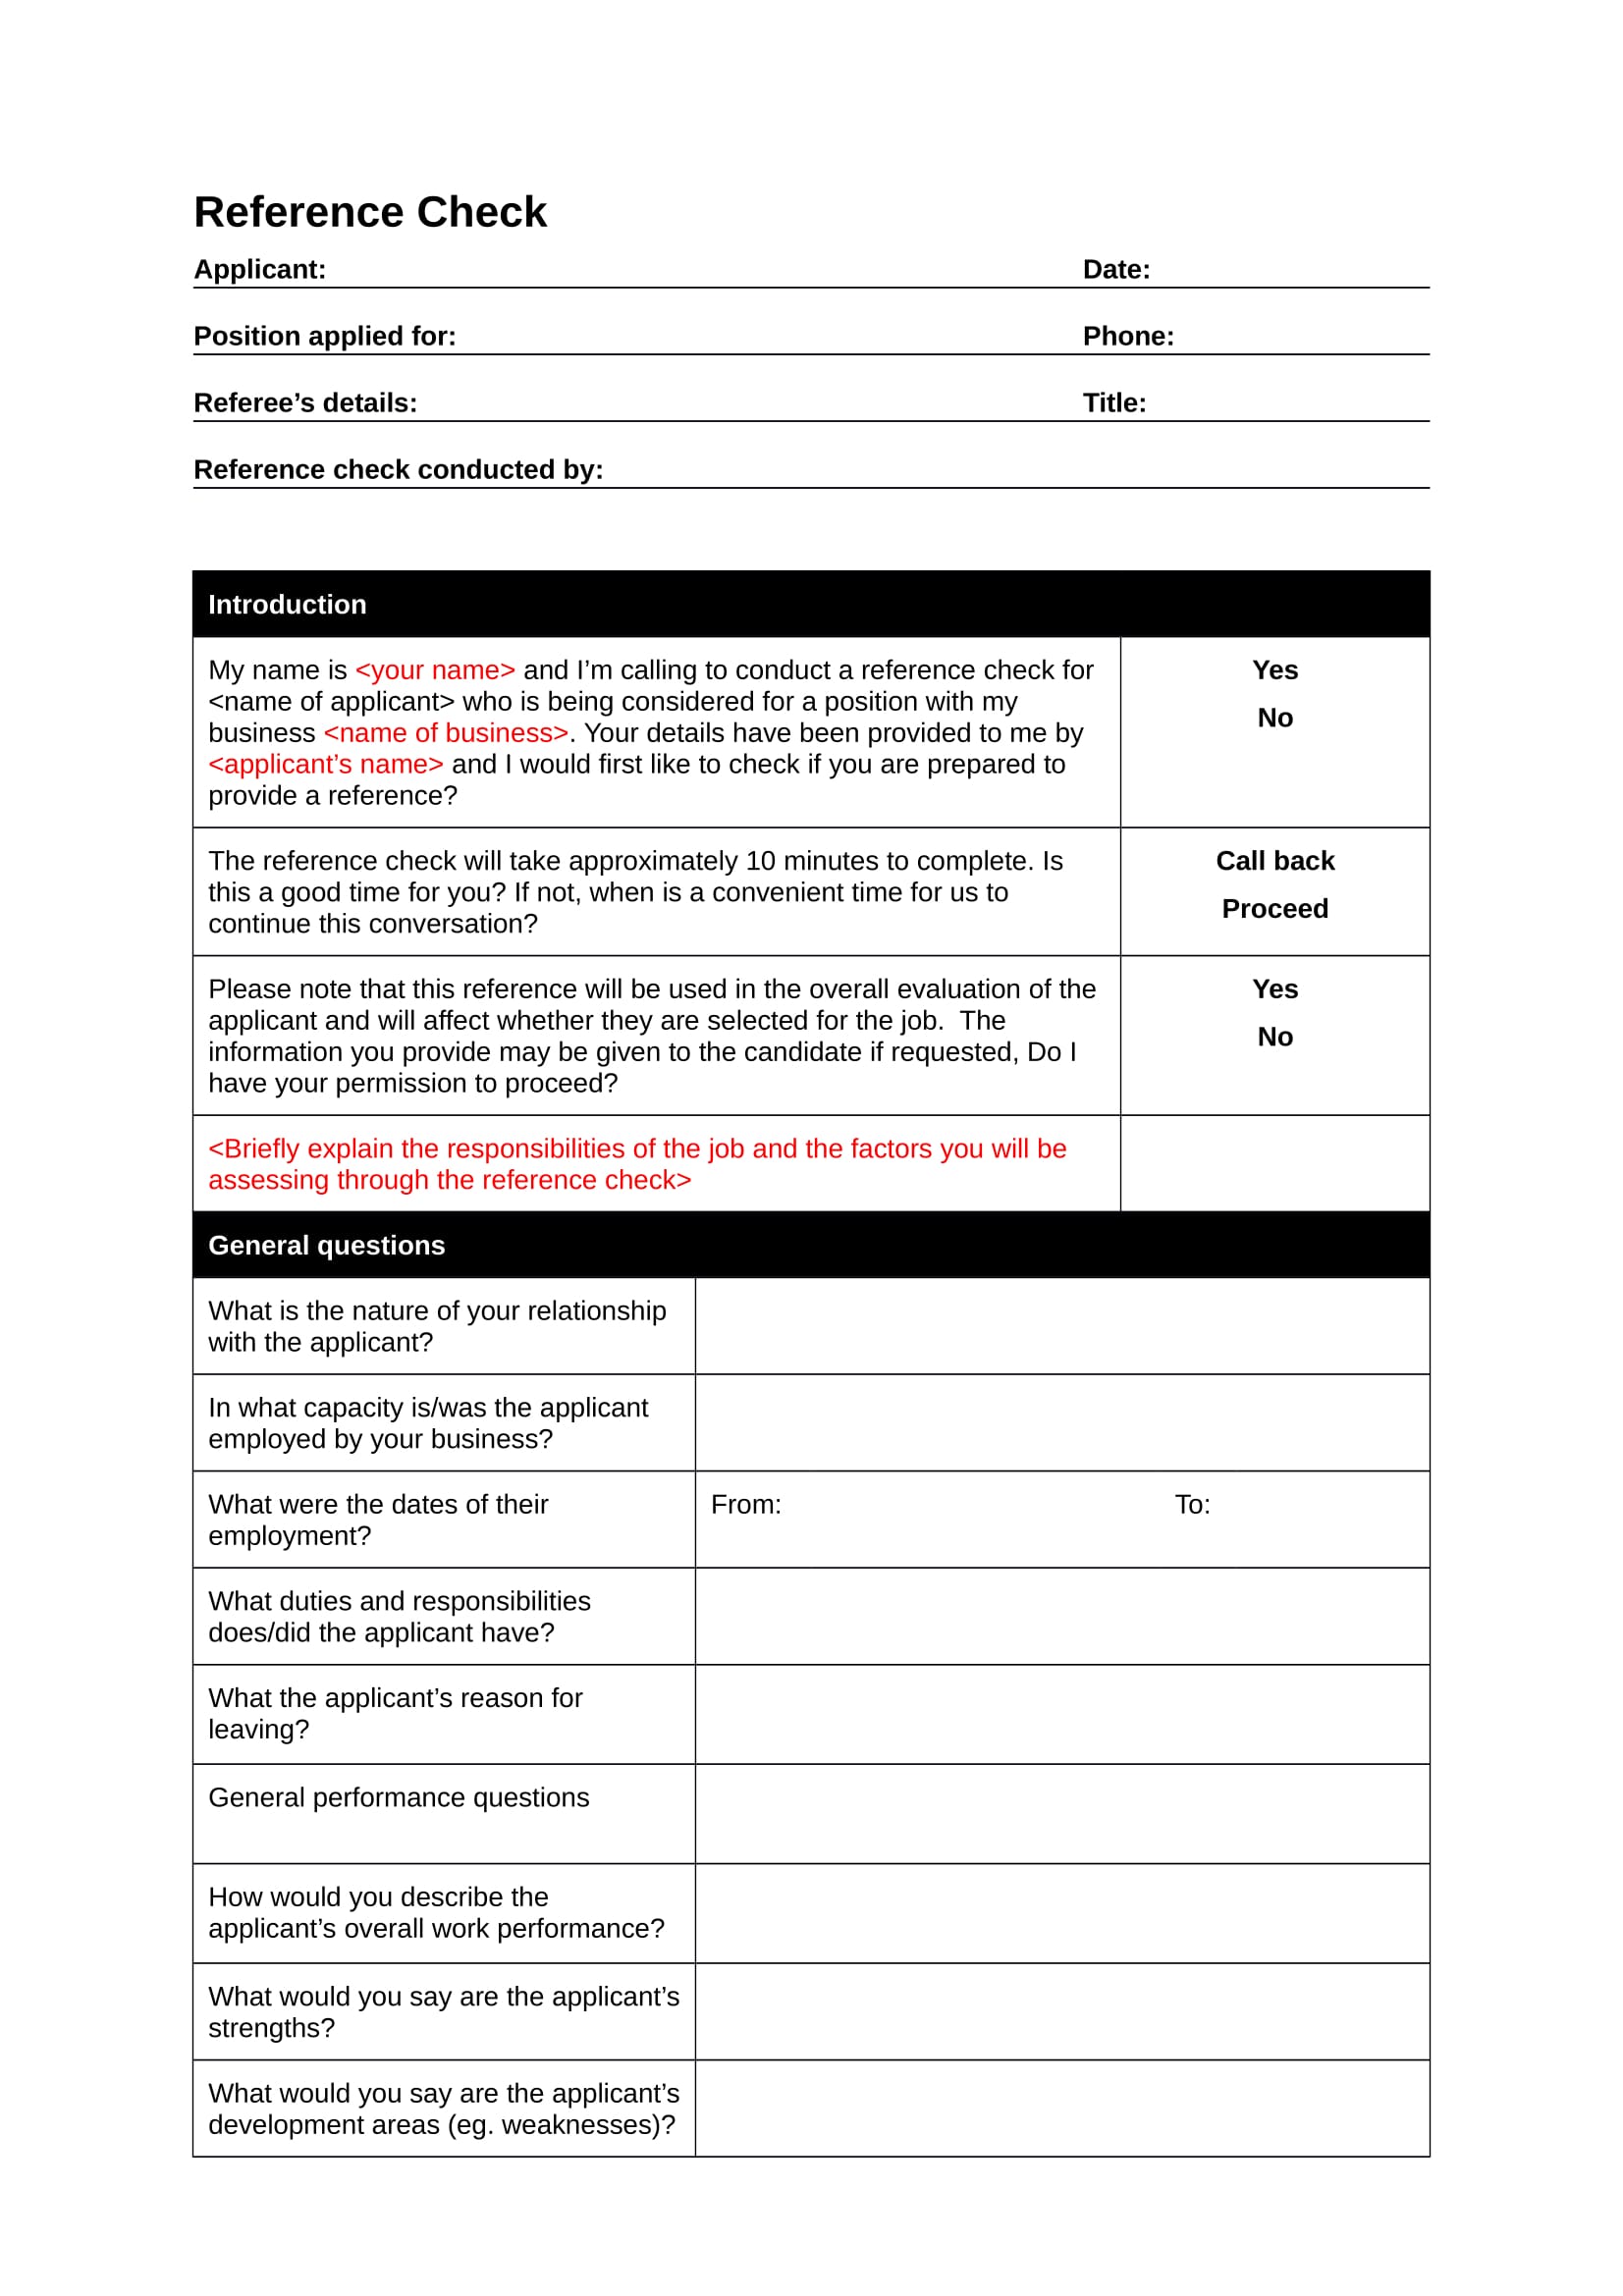 Reference Questionnaire Template